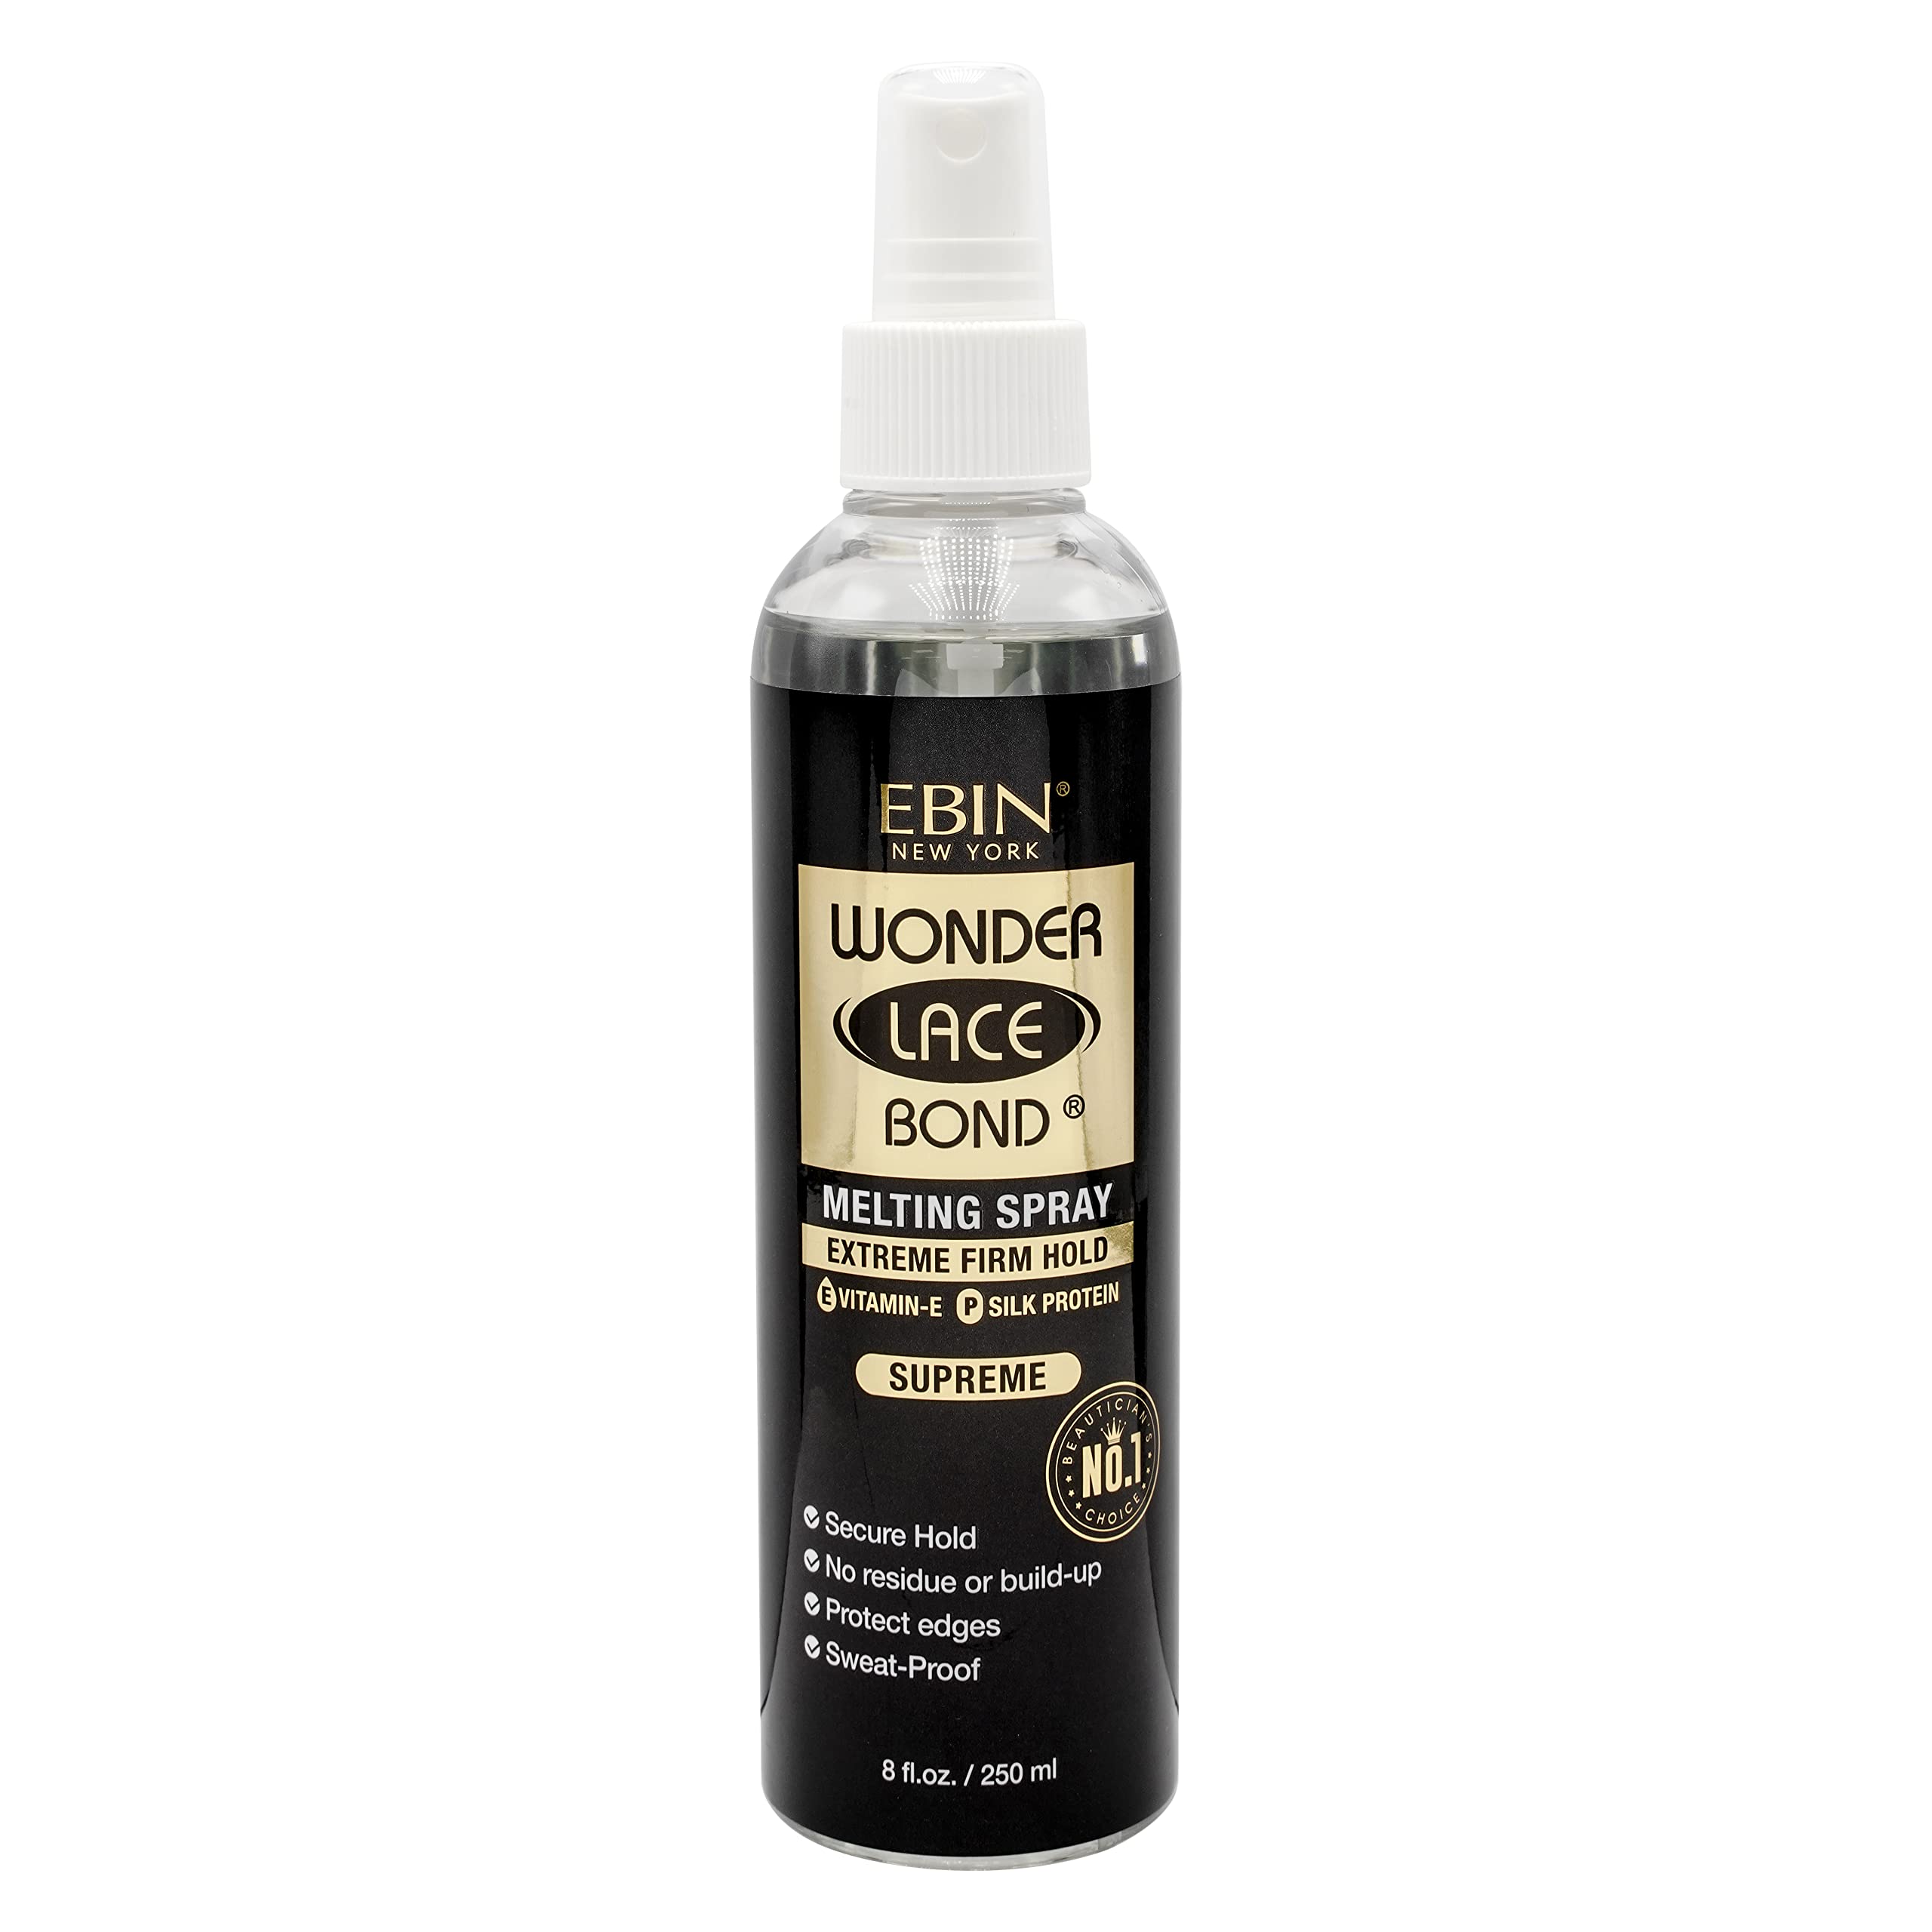 EBIN NEW YORK Wonder Bond Melting Spray 8oz/ 250ml - Extreme Firm Hold  (Supreme)  No Reside, Long Lasting Formula with Protecting Edges, Gives  Undetectable and Natural Look Supreme (Extreme Firm Hold)